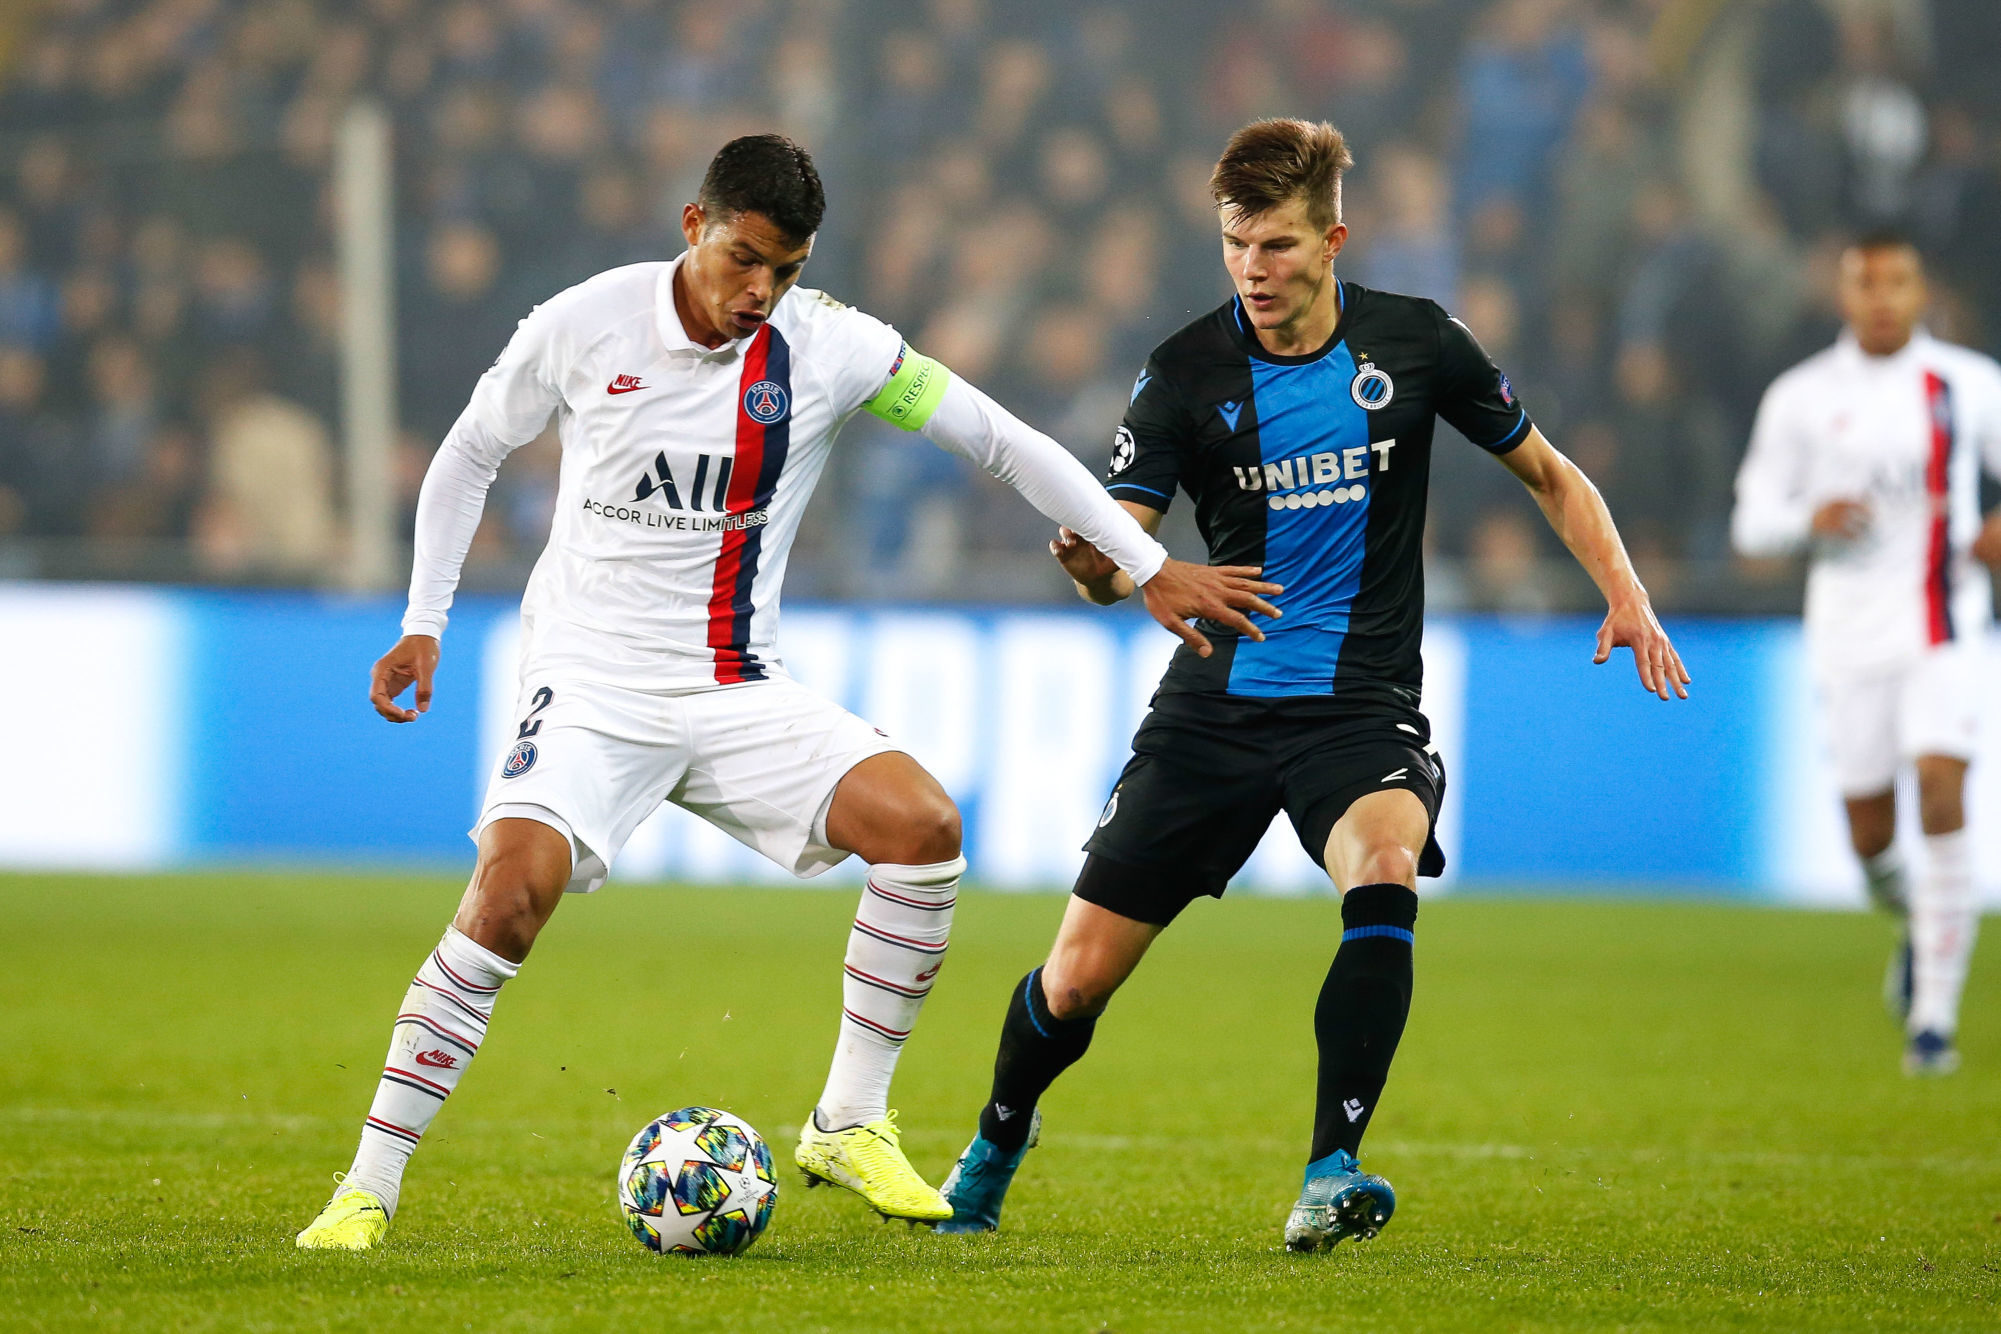 PSG's captain Thiago Silva and PSG's captain Thiago Silva fight for the ball during a soccer game between Belgian team Club Brugge KSV and French club Paris Saint-Germain, Tuesday 22 October 2019 in Brugge, match 3/6 in the group stage of the UEFA Champions League, in Group A. BELGA PHOTO BRUNO FAHY 

Photo by Icon Sport - Thiago SILVA - Jan Breydel Stadium - Bruges (Belgique)